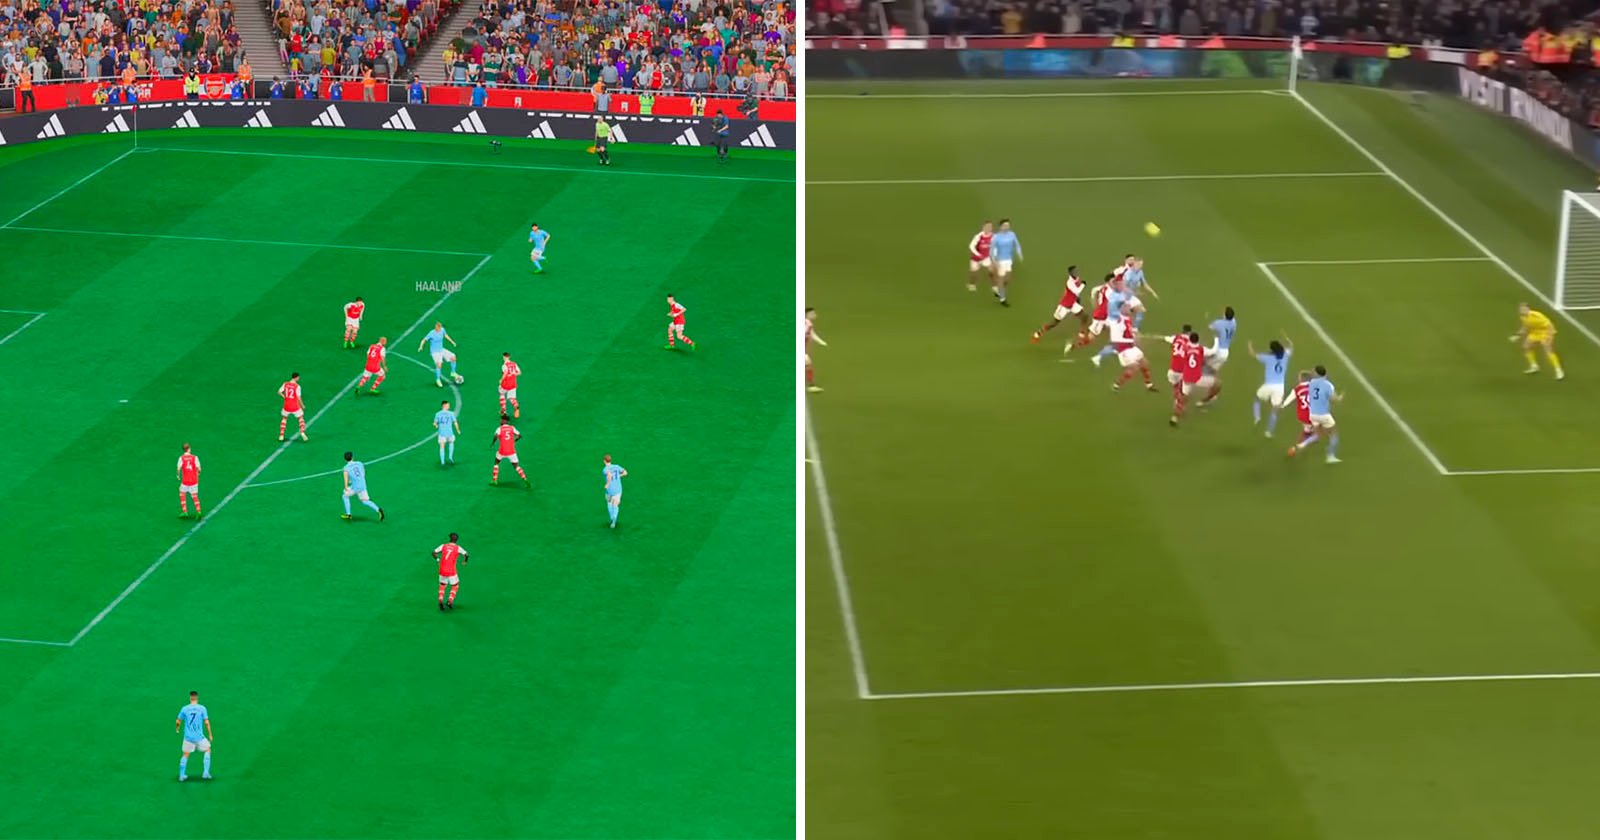 Premier League to Test Video Game-Inspired Camera Angle This Weekend